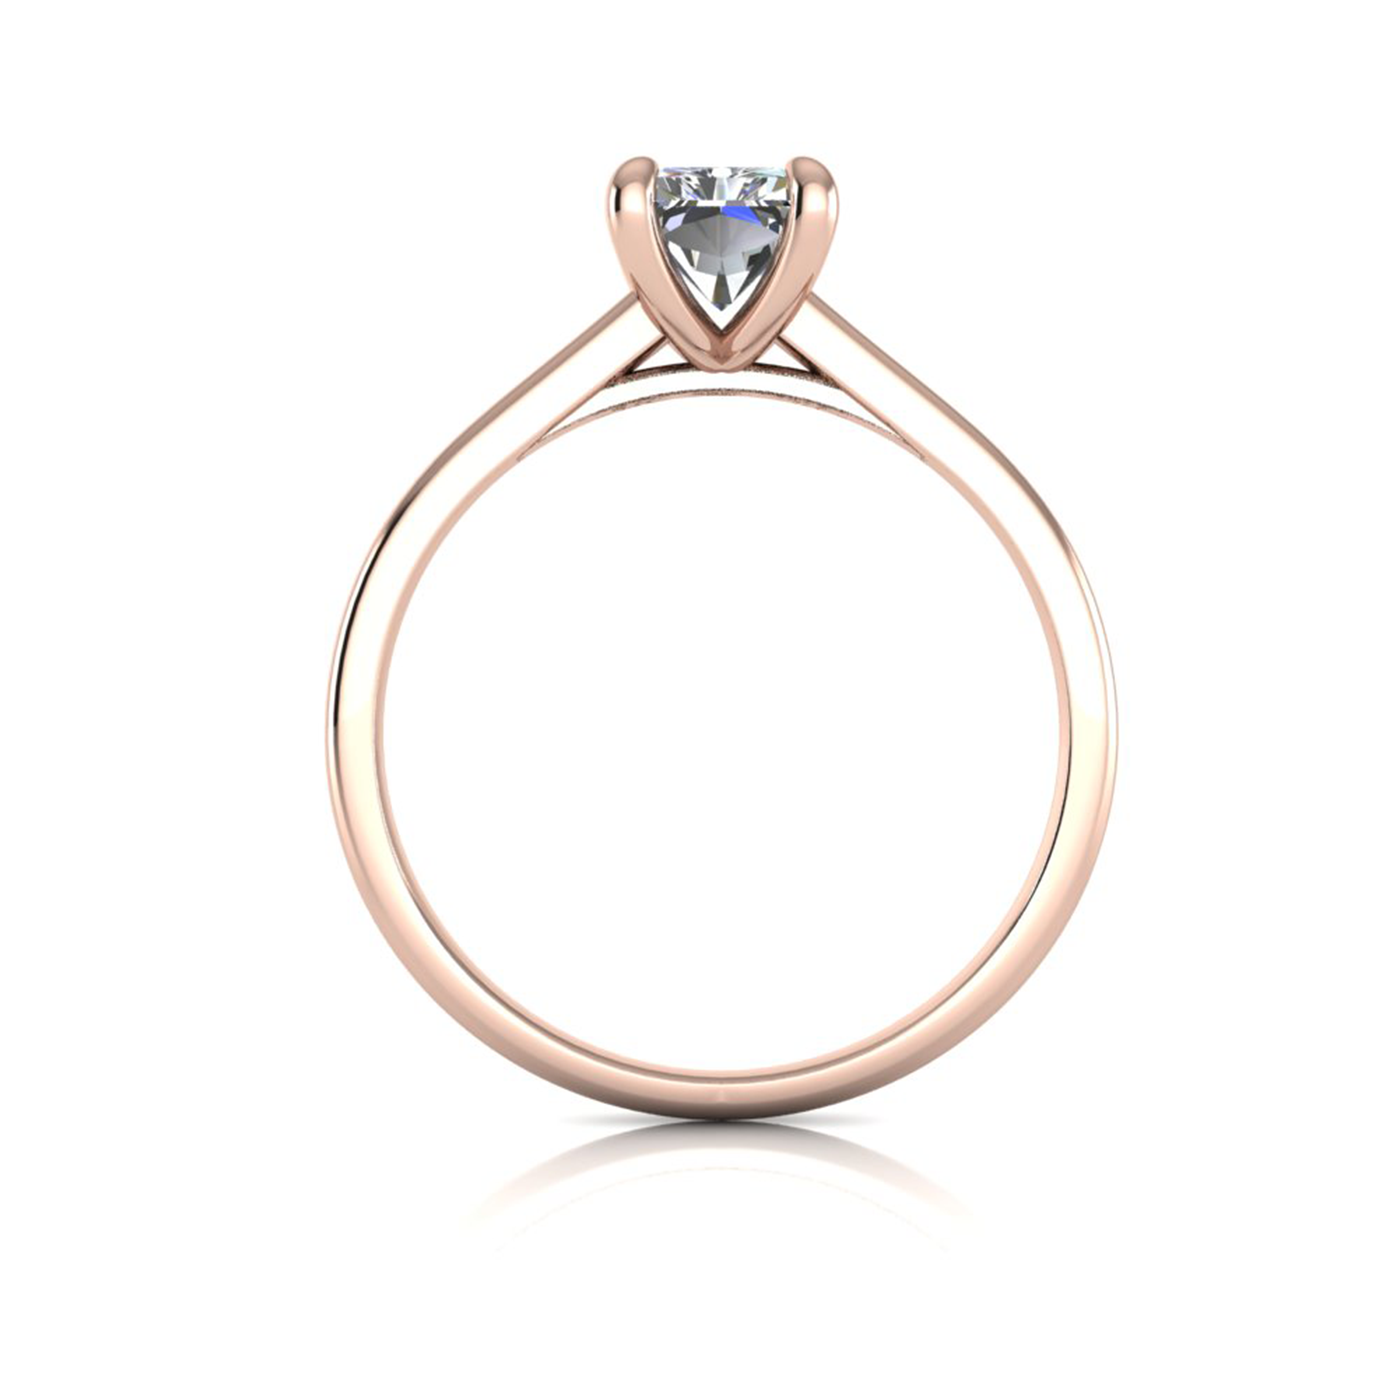 18k rose gold  1,20 ct 4 prongs solitaire radiant cut diamond engagement ring with whisper thin band